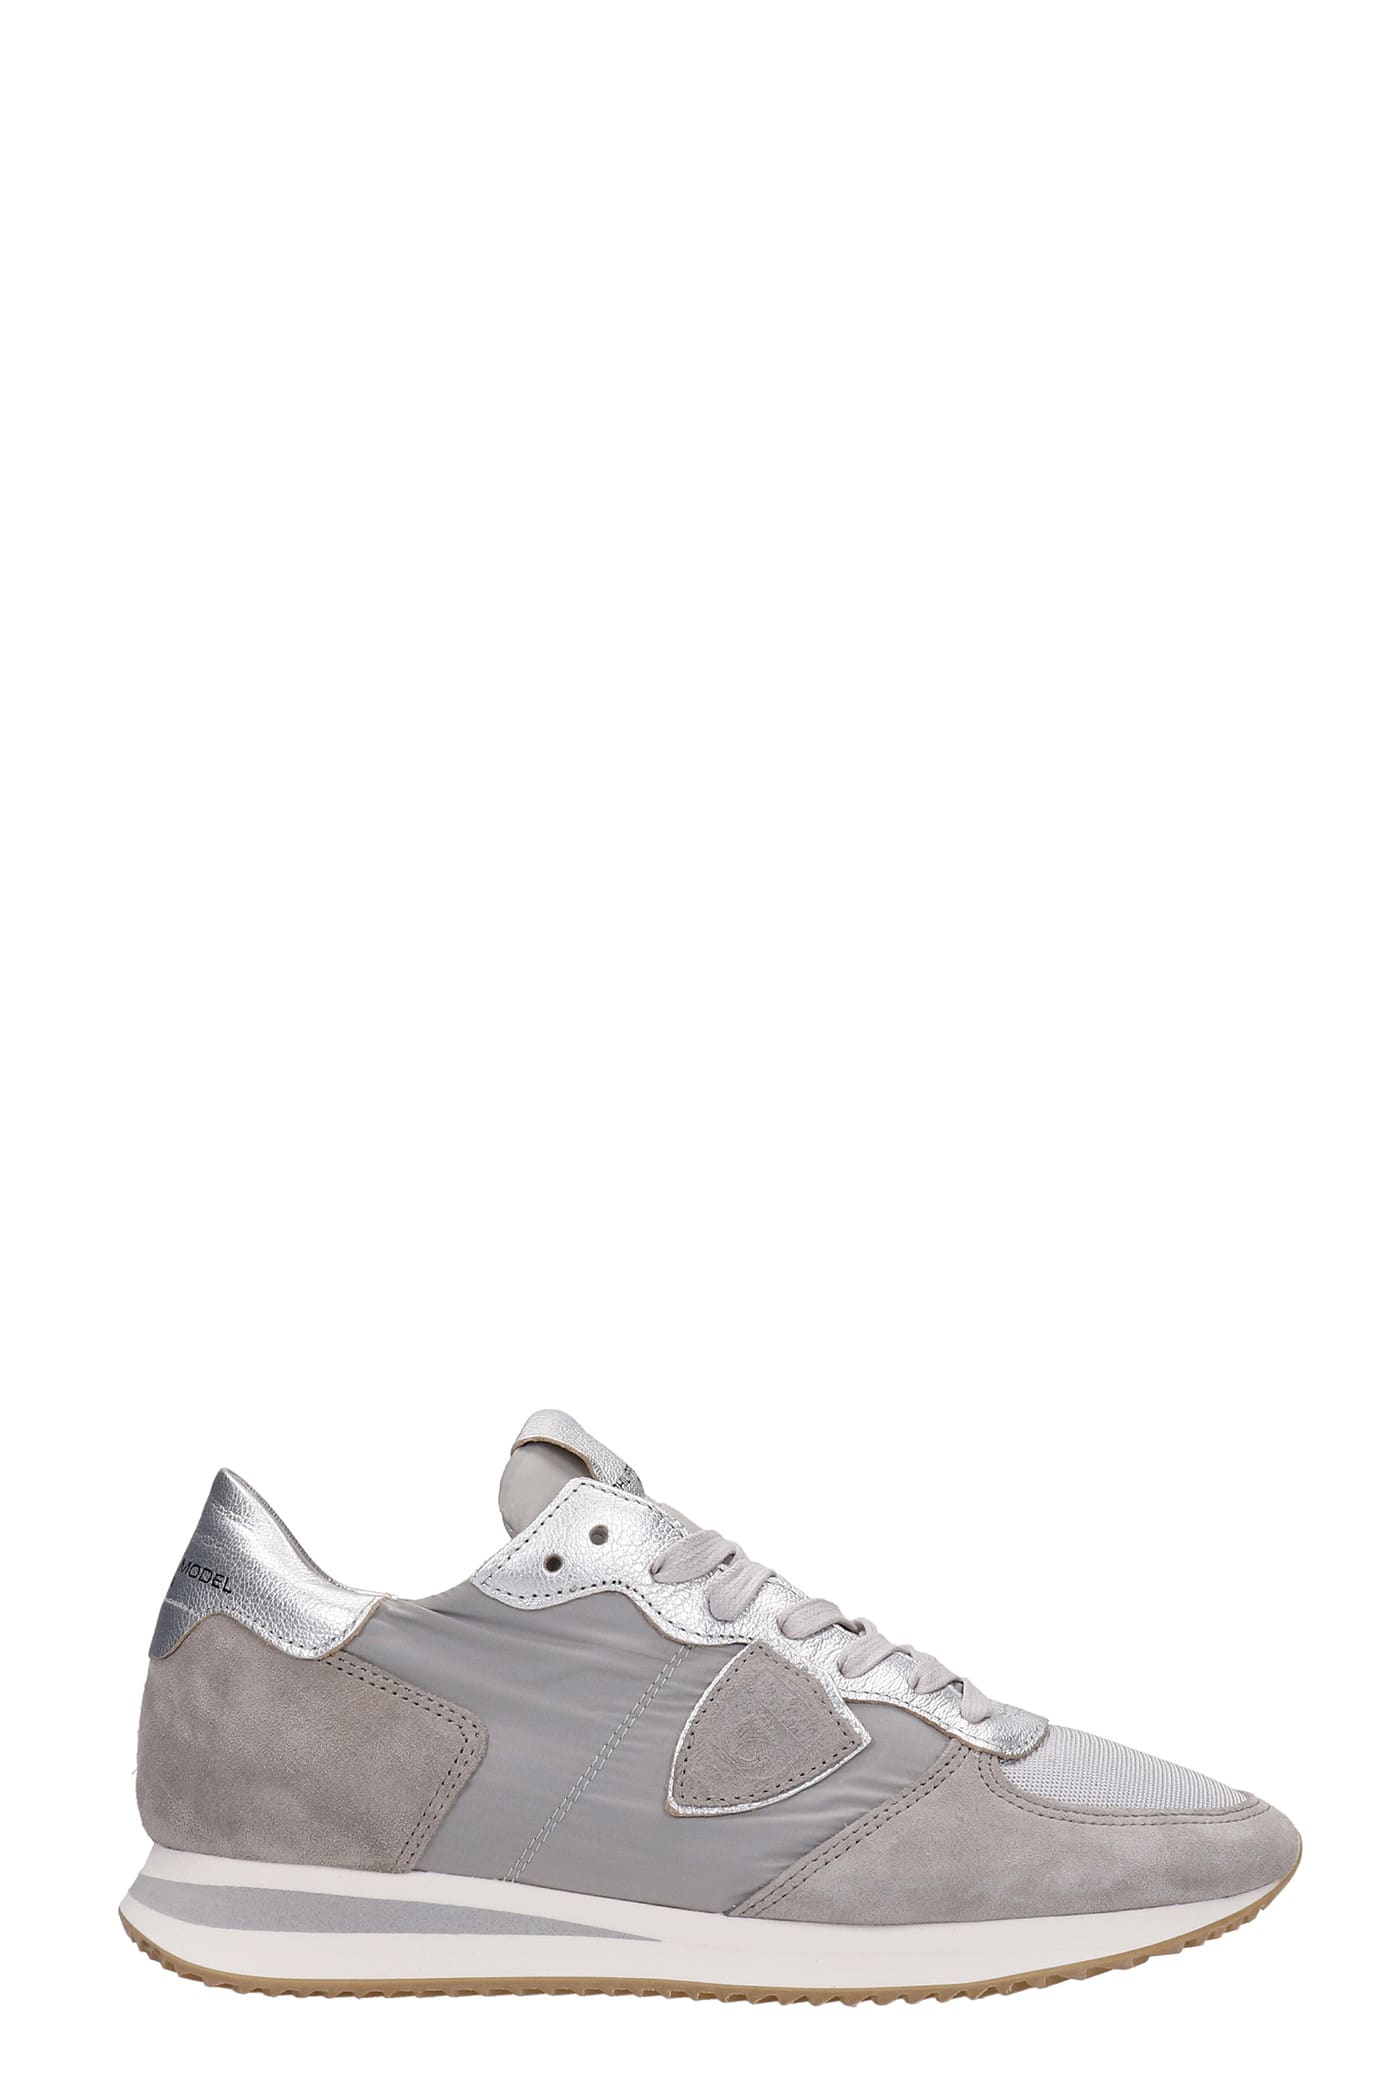 Philippe Model Trpx Sneakers In Silver Suede And Fabric